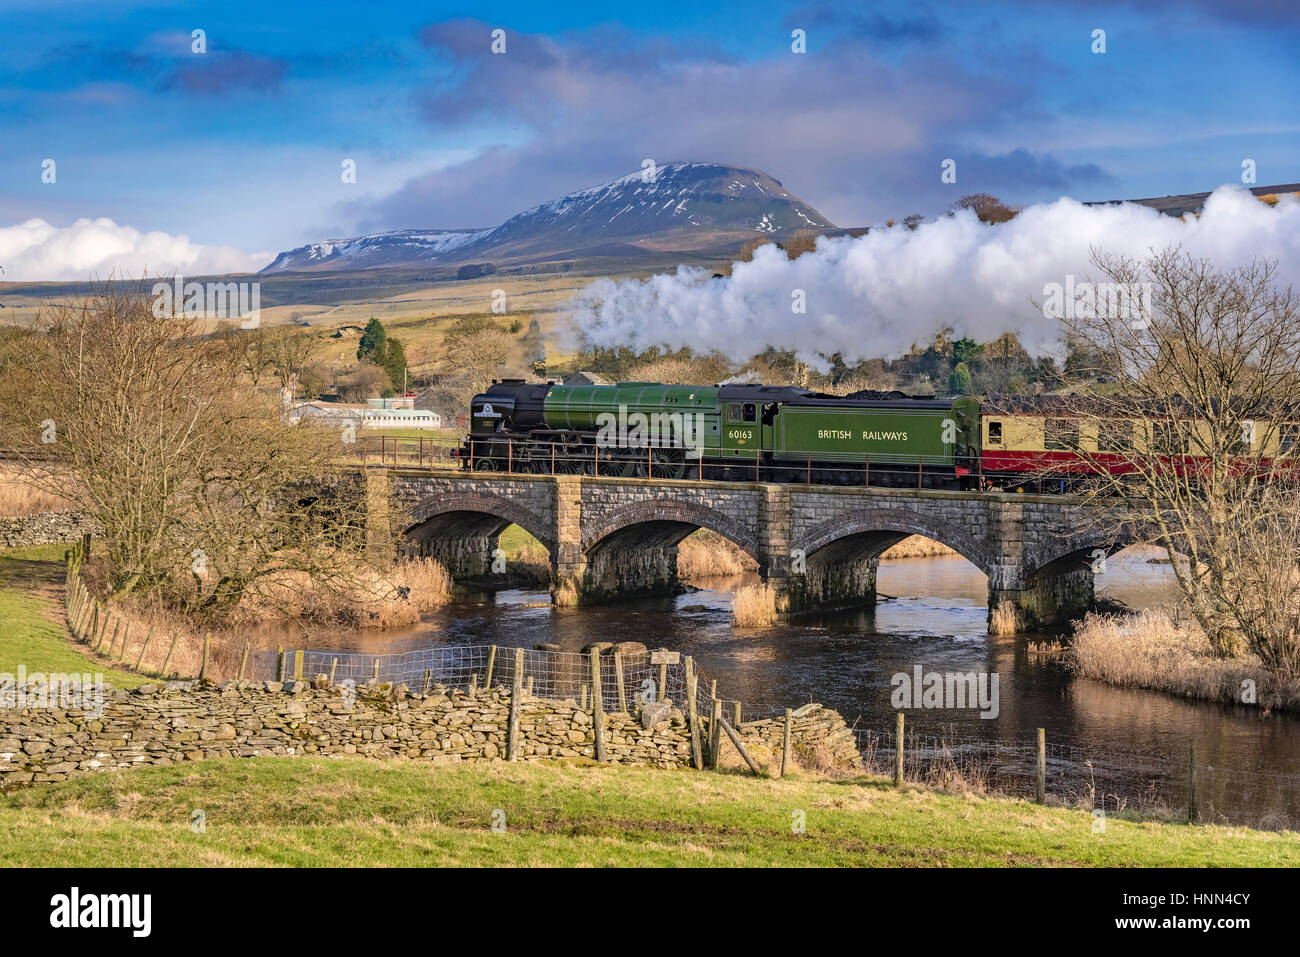 Helwith Bridge. North Yorkshire. North West England. Wednesday 15th February 2017. The Peppercorn steam engine Tornado on the secnond day of hauling scheduled trains between Skipton and Appleby on the Settle to Carlisle railway. The services are the first schedueld steam hauled services on British rail for 50 years. The train is pictured passing over Helwith Bridge with the towering Pen Y Ghent in the background. Picture by Andrew Davidson. Stock Photo